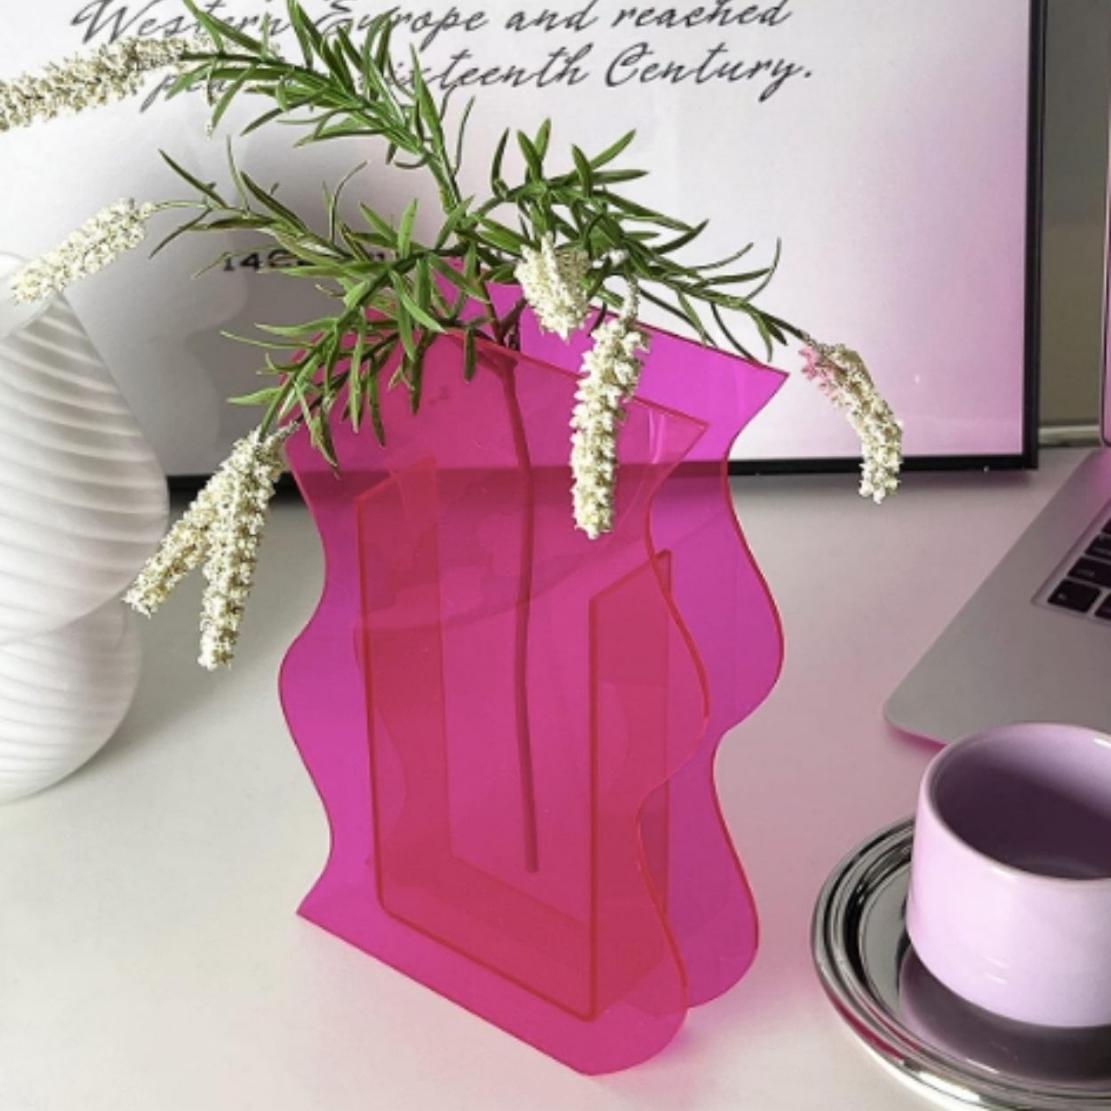 Pink, wavy acrylic vase on table with flowers